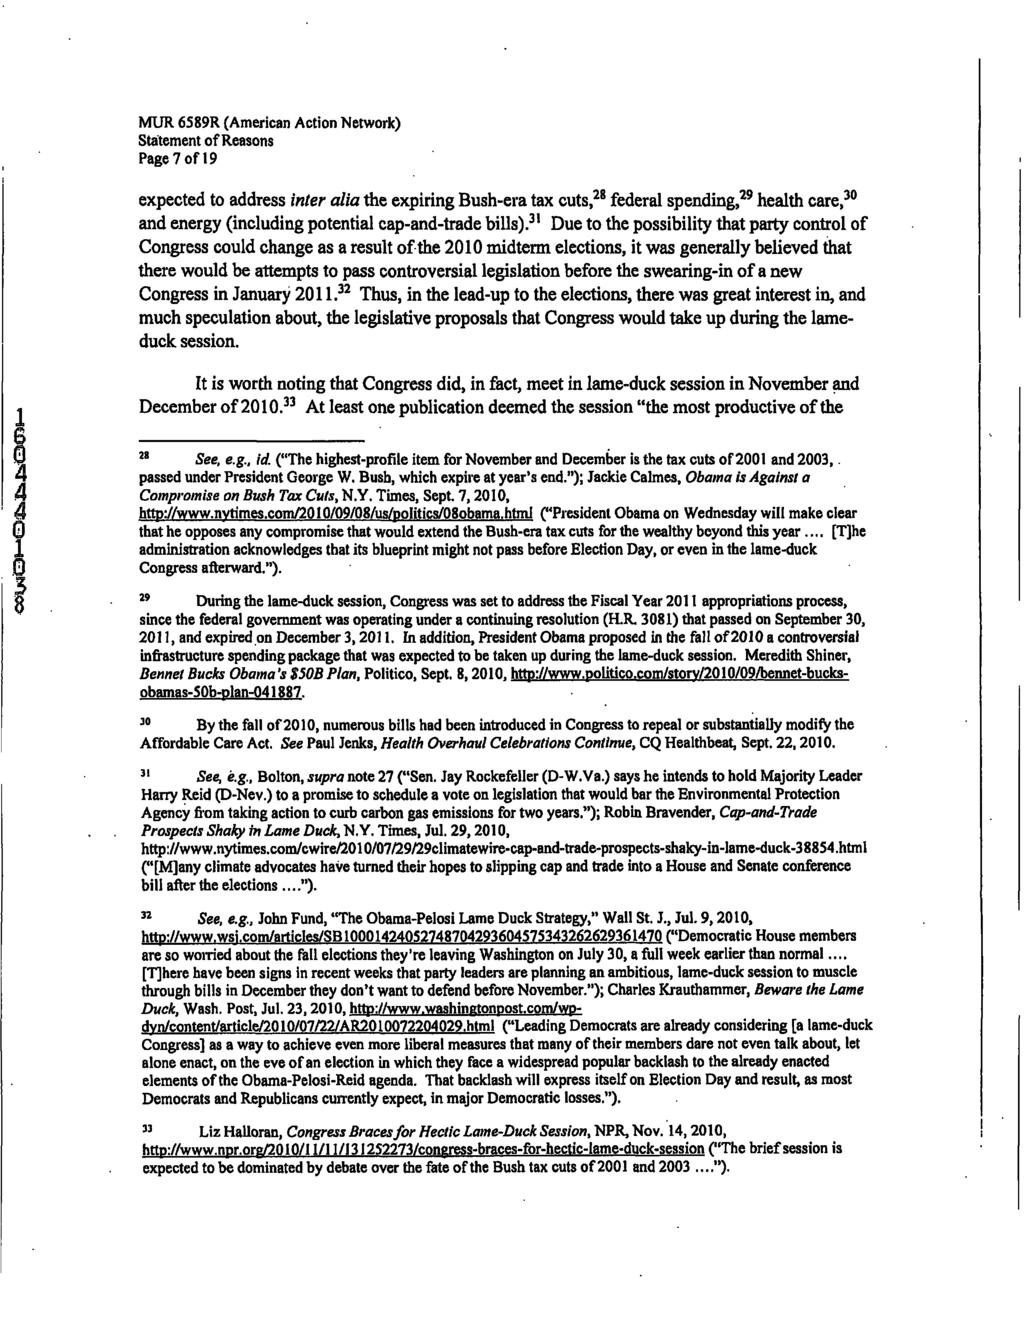 Case 1:16-cv-02255-CRC Document 8-1 Filed 04/14/17 Page 8 of 20 MUR 6589R (American Action Network) Statement of Reasons Page7ofl9 expected to address inter alia the expiring Bush-era tax cuts,^*